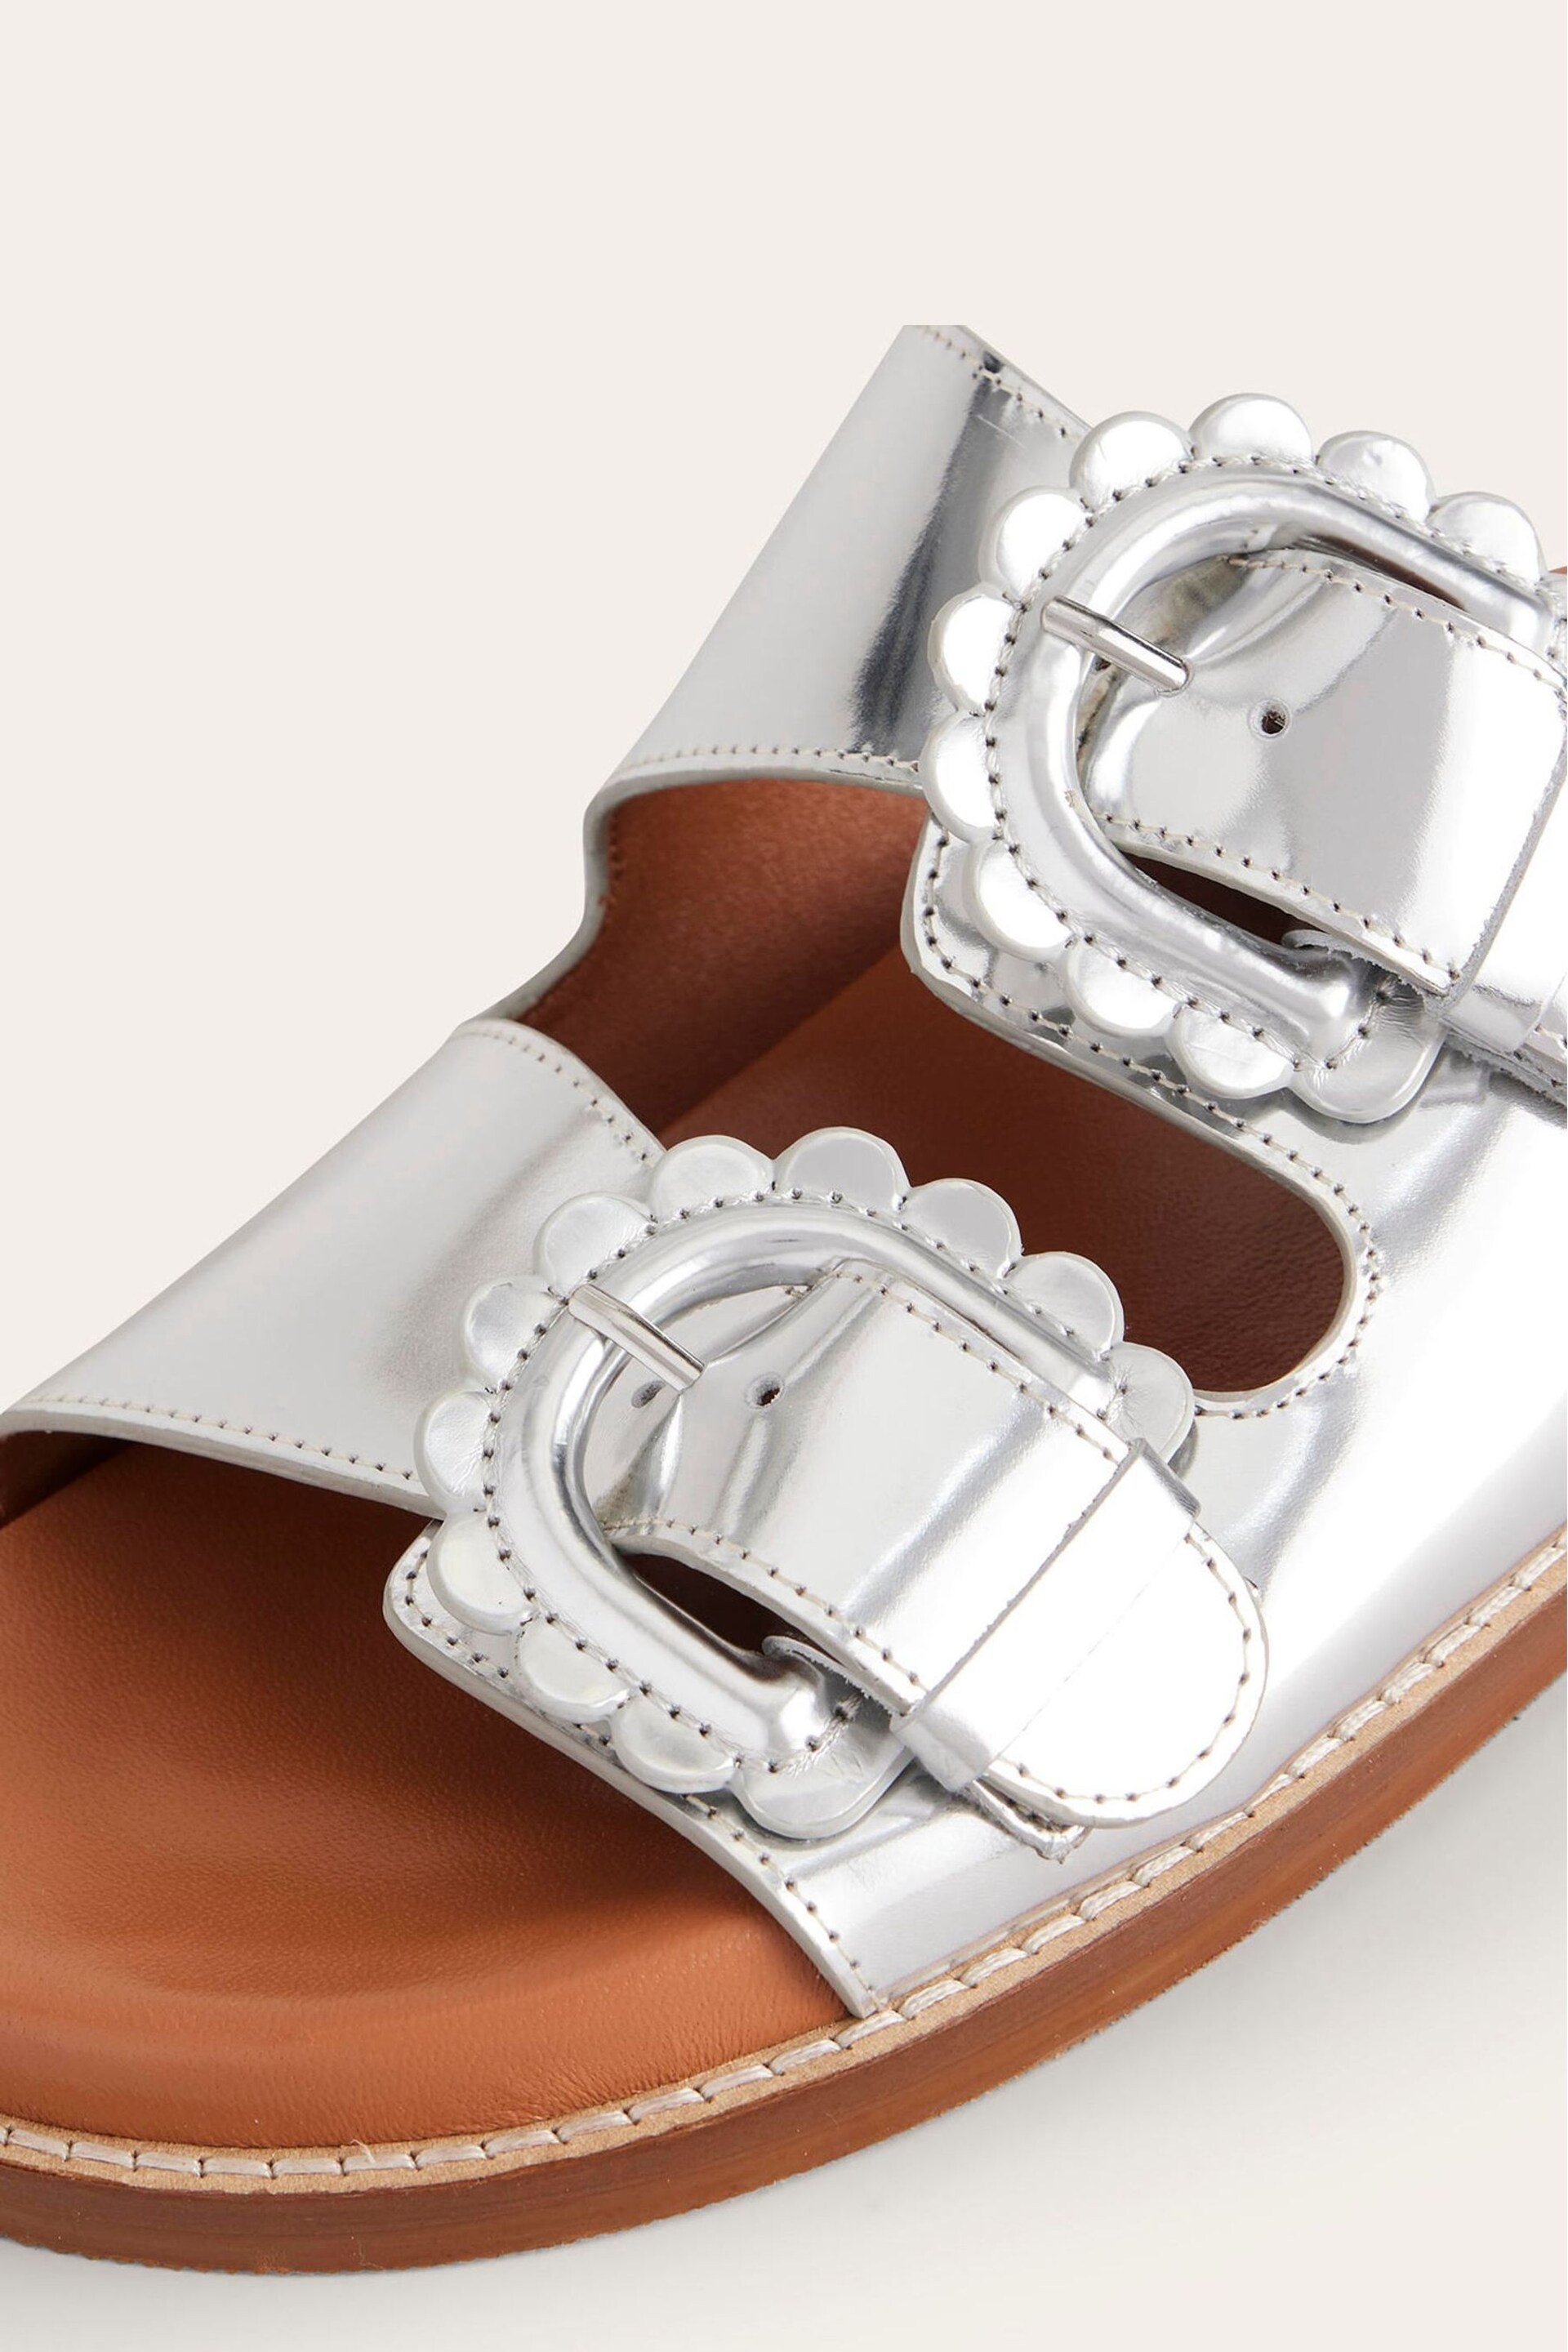 Boden Silver Double Buckle Sliders - Image 4 of 4